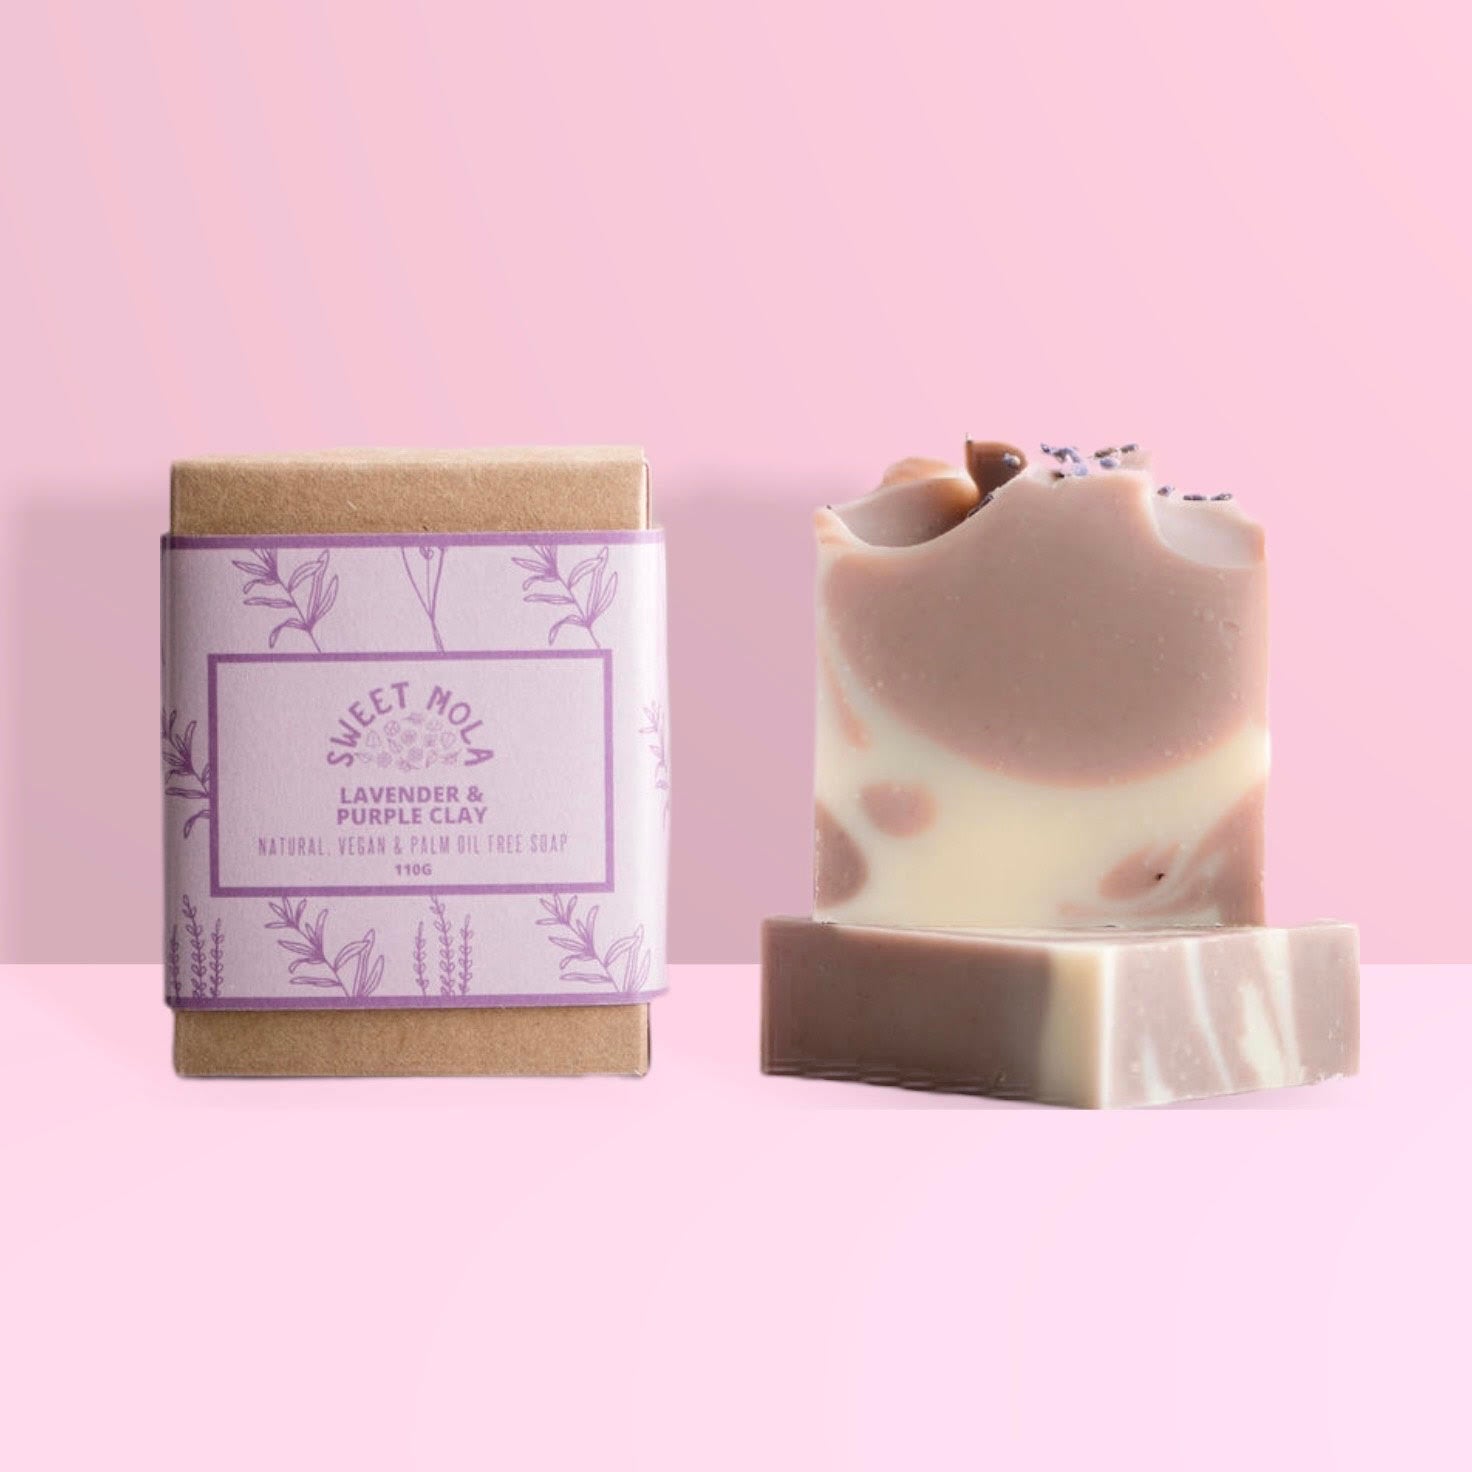 Lavender bar soap with soap box with purple label.